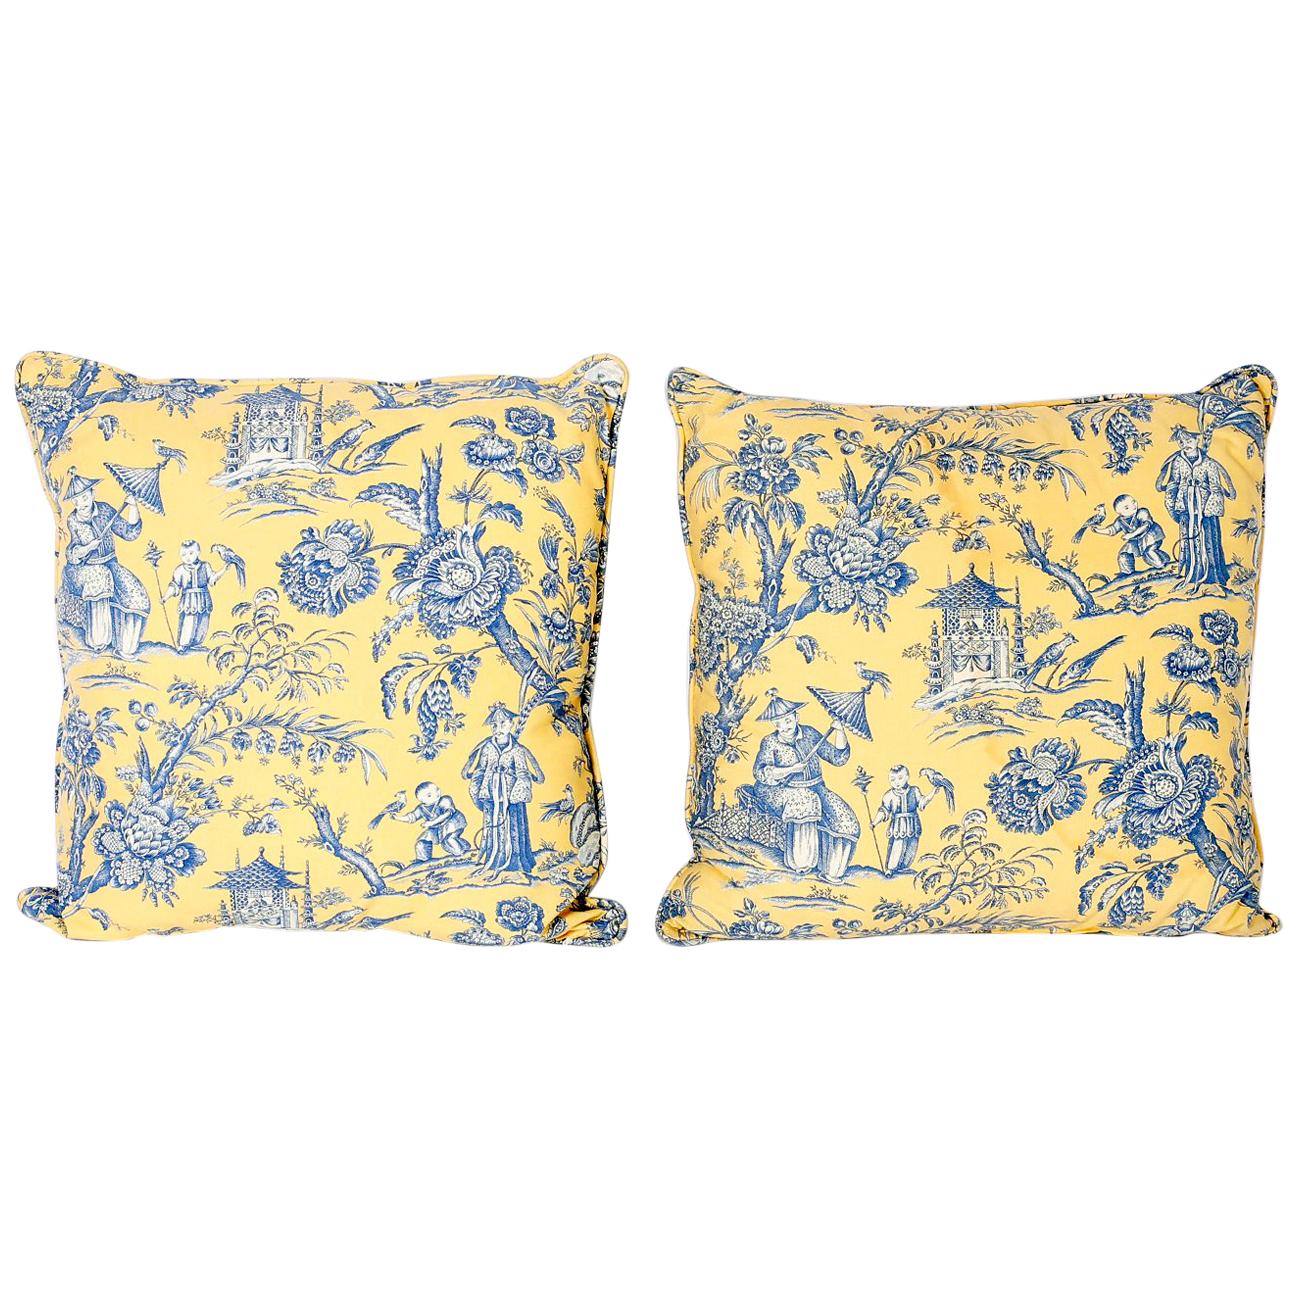 French Toile Style Linen Pillows